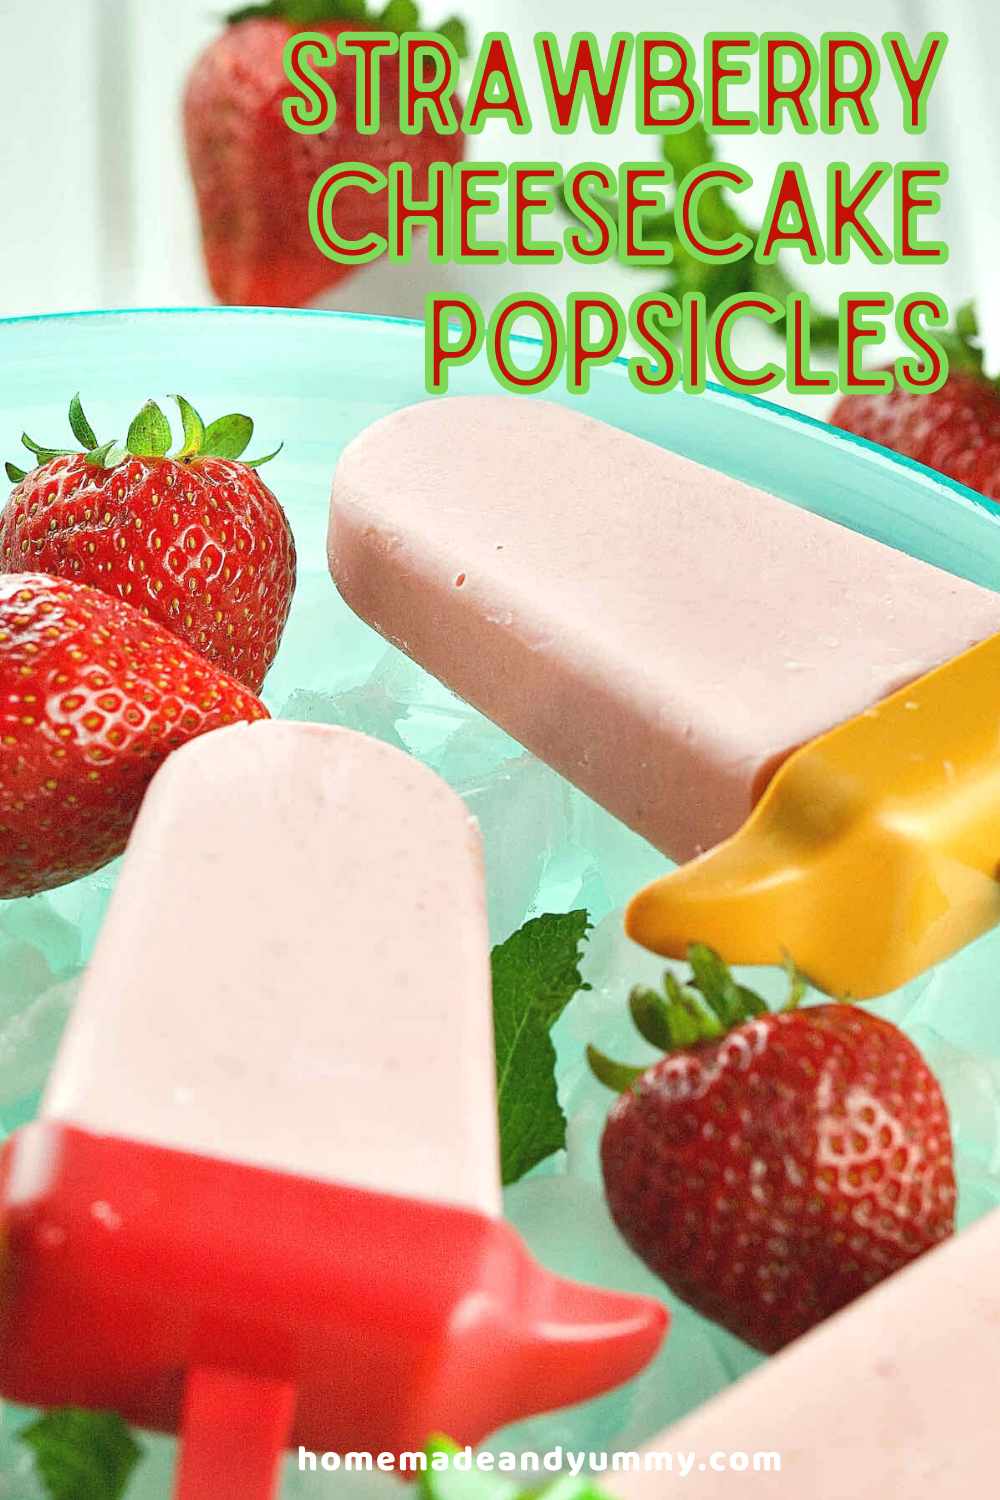 Strawberry Cheesecake Popsicle Pin Image